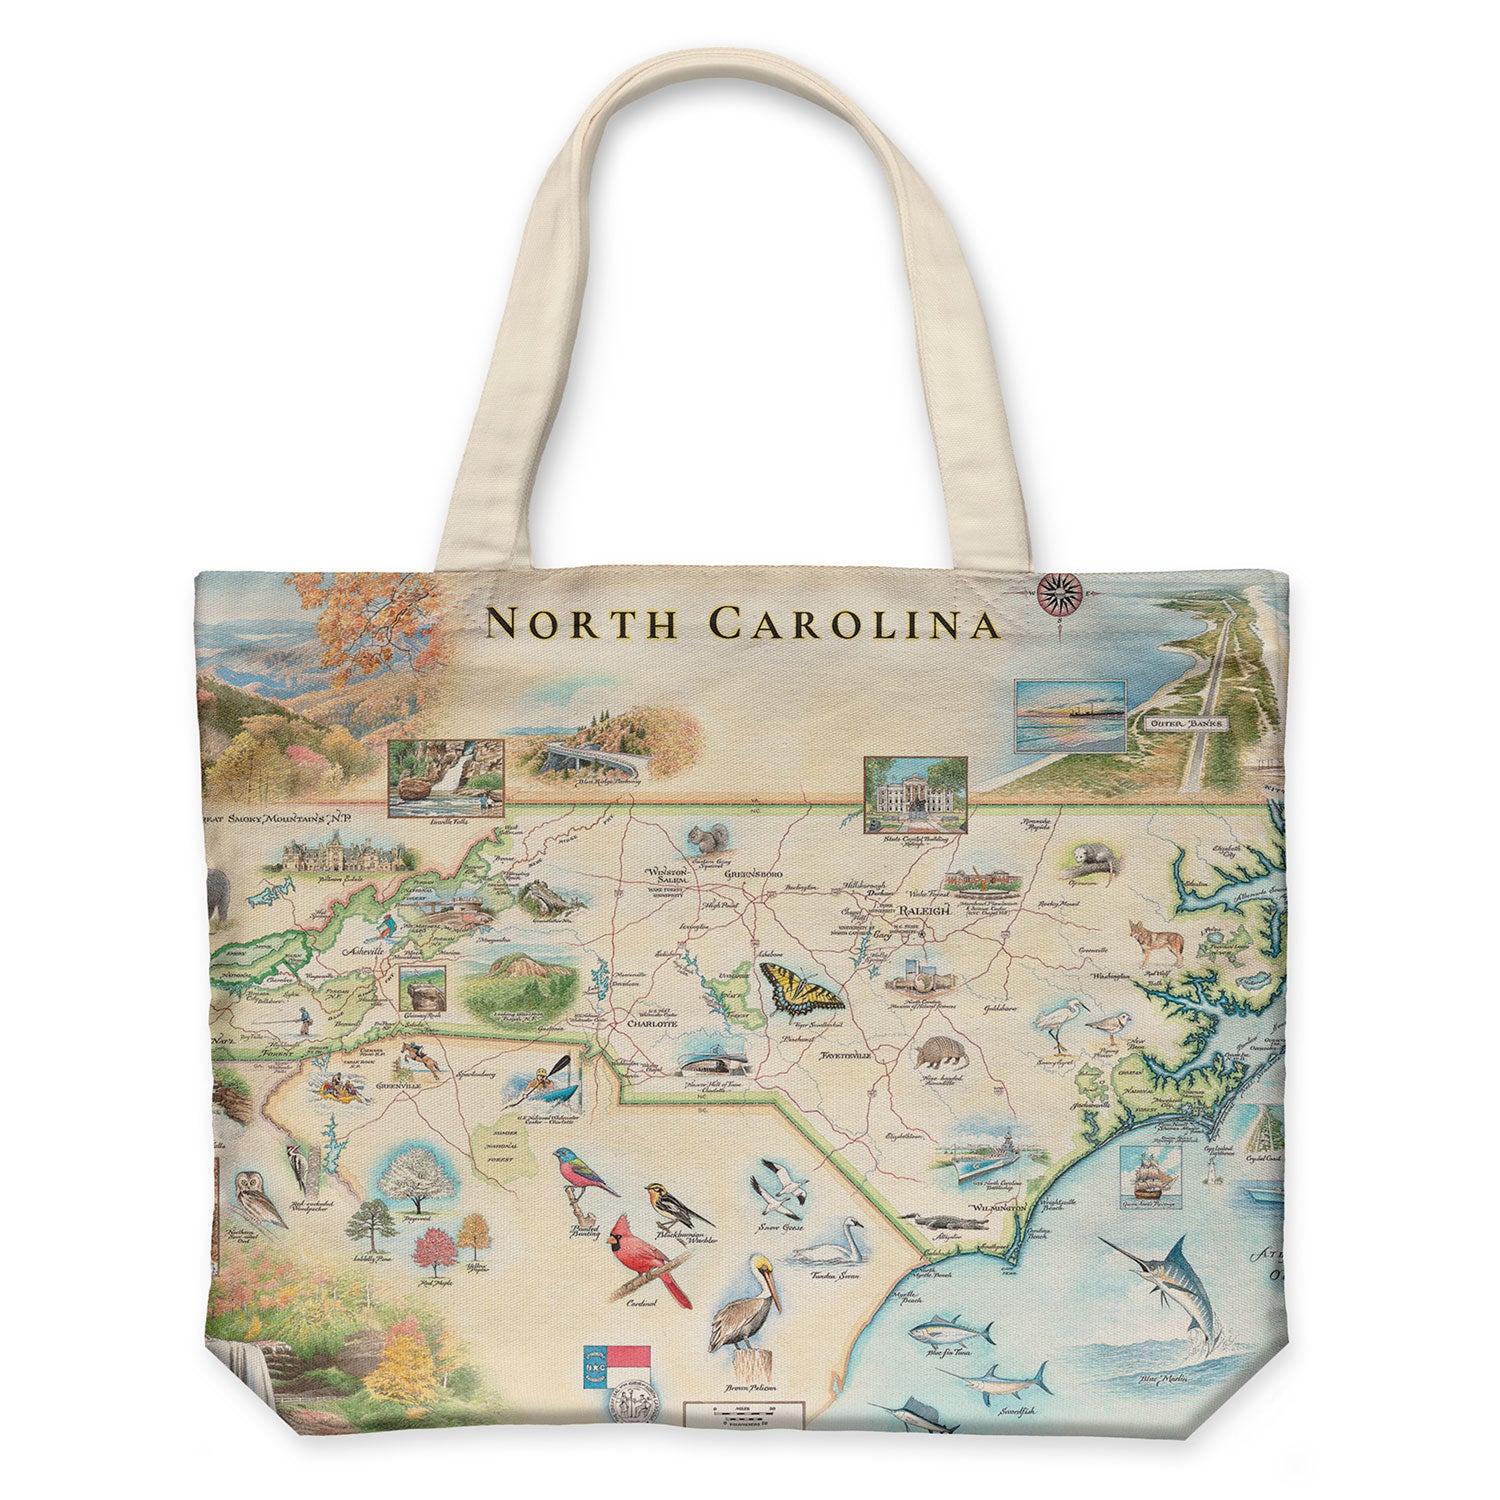 North Carolina State Map Tote Bags by Xplorer Maps. The map features Dry Falls in the Nantahala National Forest, the Outer Banks, a Nascar Hall of Fame, and the USS North Carolina on the coast.